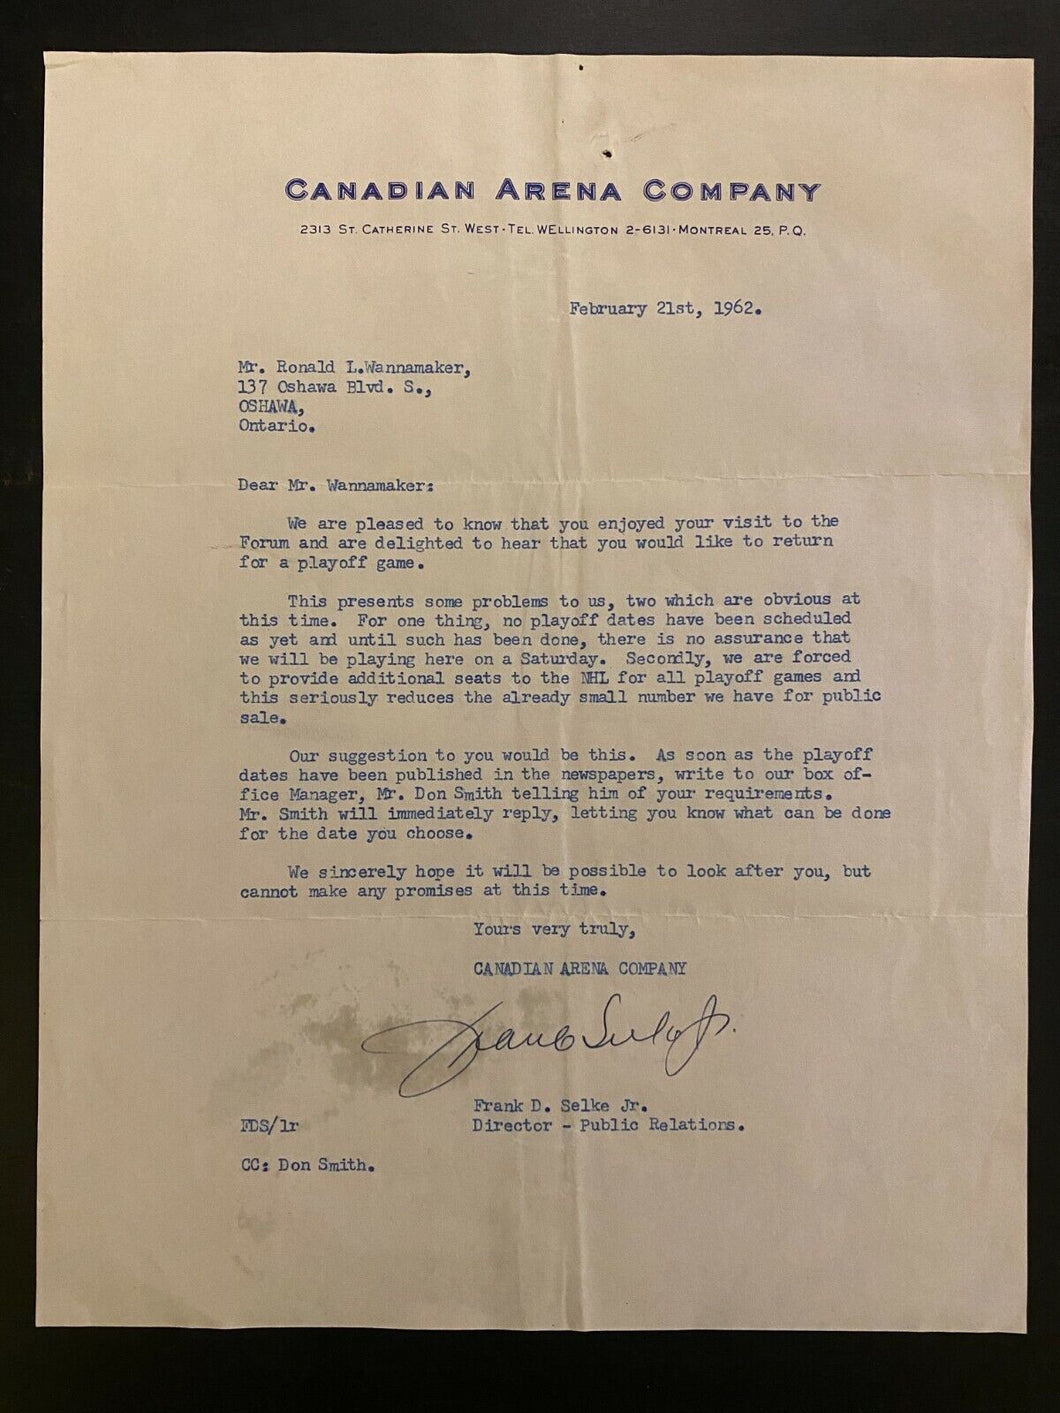 1962 NHL Hockey Signed Letter Frank Selke Jr Autographed Montreal Canadiens Rare